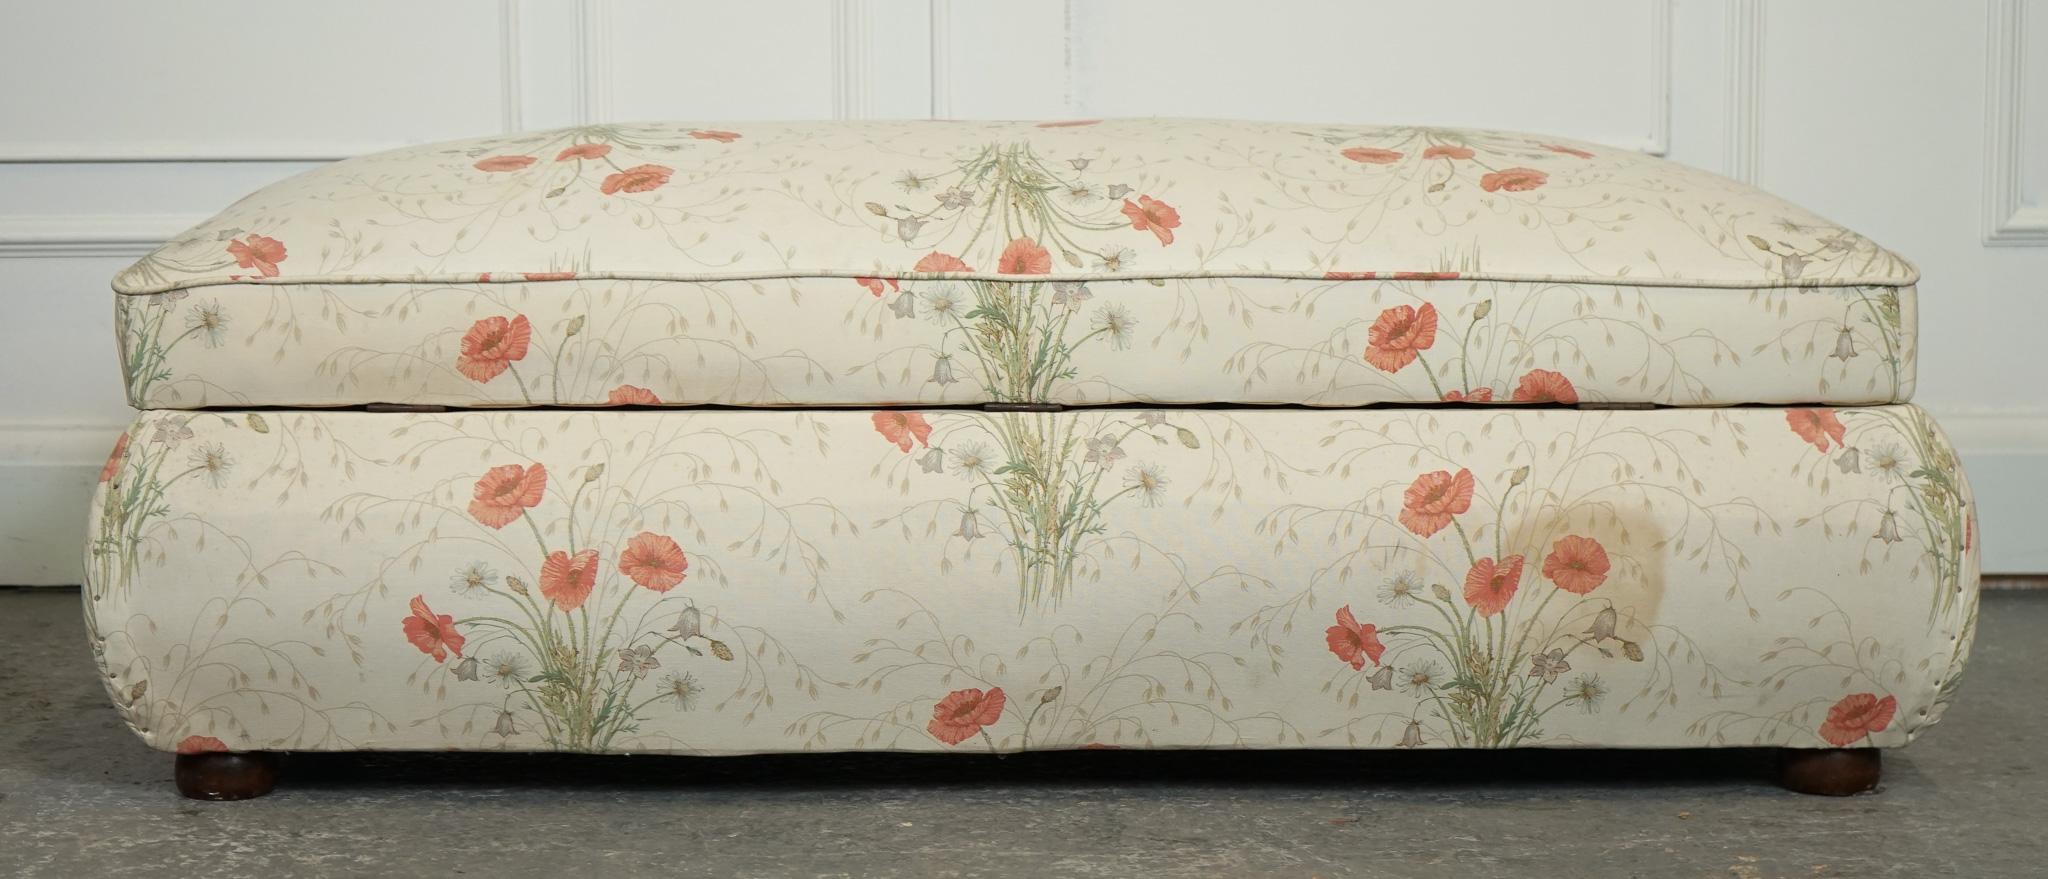 LARGE ANTIQUE VICTORIAN POPPY FLOWER PATTERN FABRiC OTTOMAN CHEST TRUNK  J1 For Sale 6